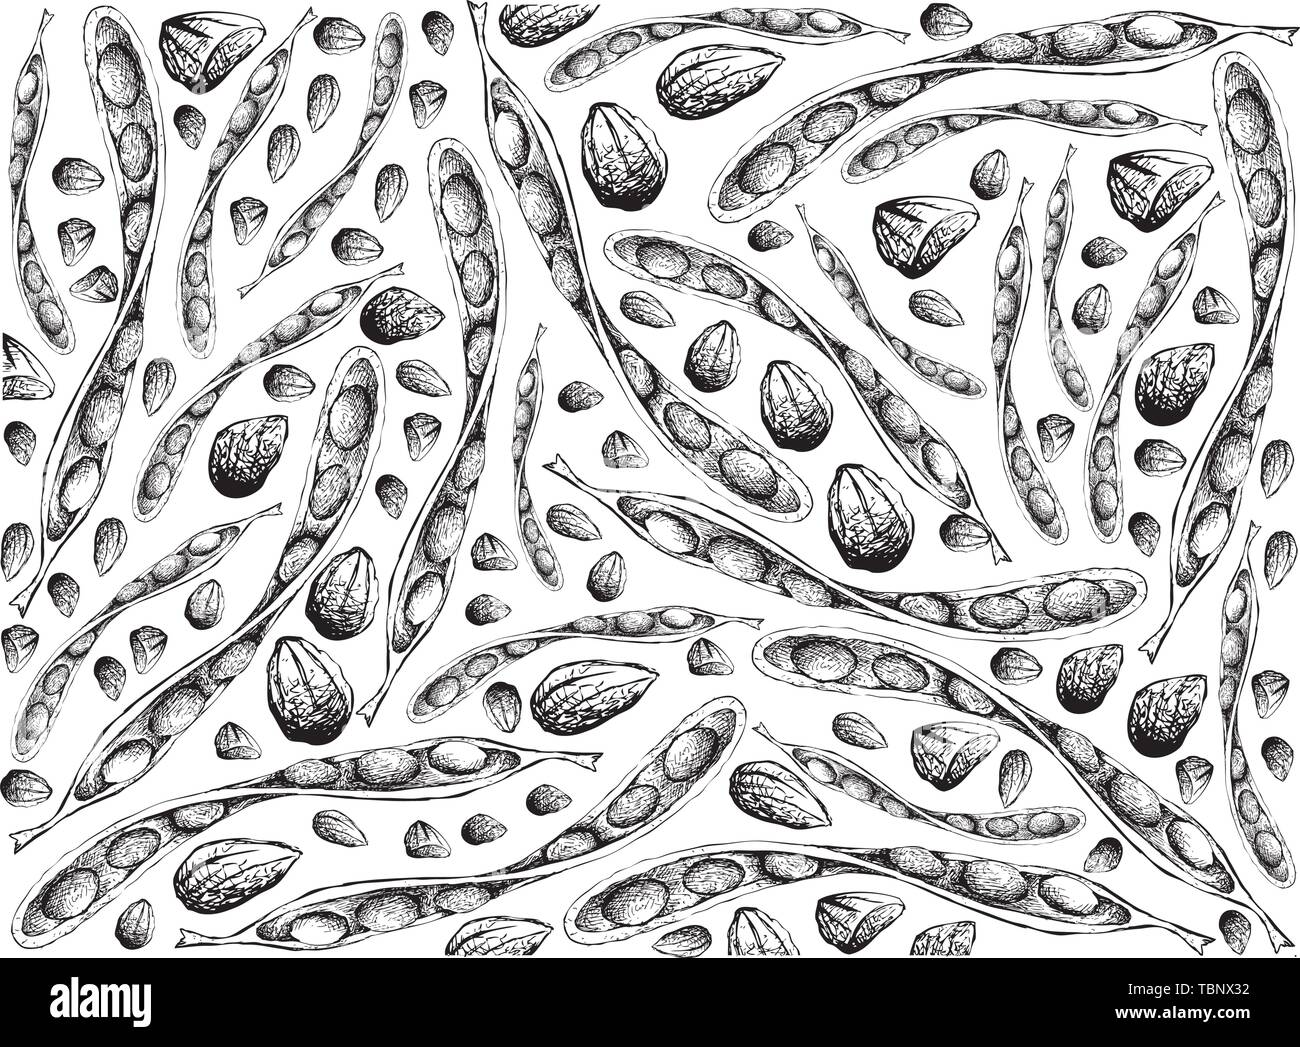 Illustration Wallpaper Background of Hand Drawn Sketch of Sato, Parkia Speciosa, Bitter Beans or Twisted Cluster Beans with Carbohydrates, Protein, Fo Stock Vector